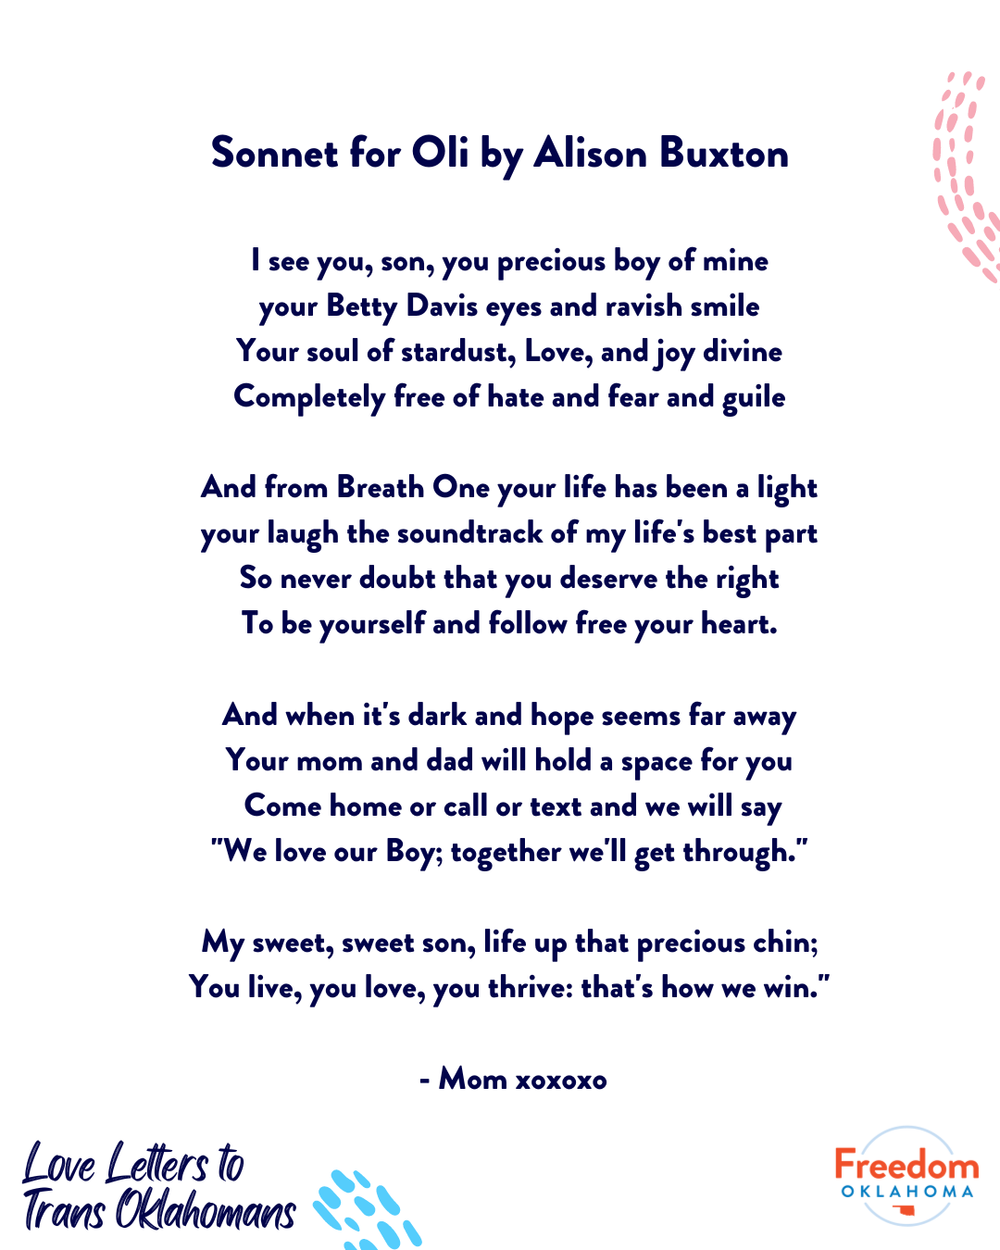  Sonnet for Oli by Alison Buxton: I see you, son, you precious boy of mine your Betty Davis eyes and ravish smile Your soul of stardust, Love, and joy divine Completely free of hate and fear and guile And from Breath One your life has been a light yo